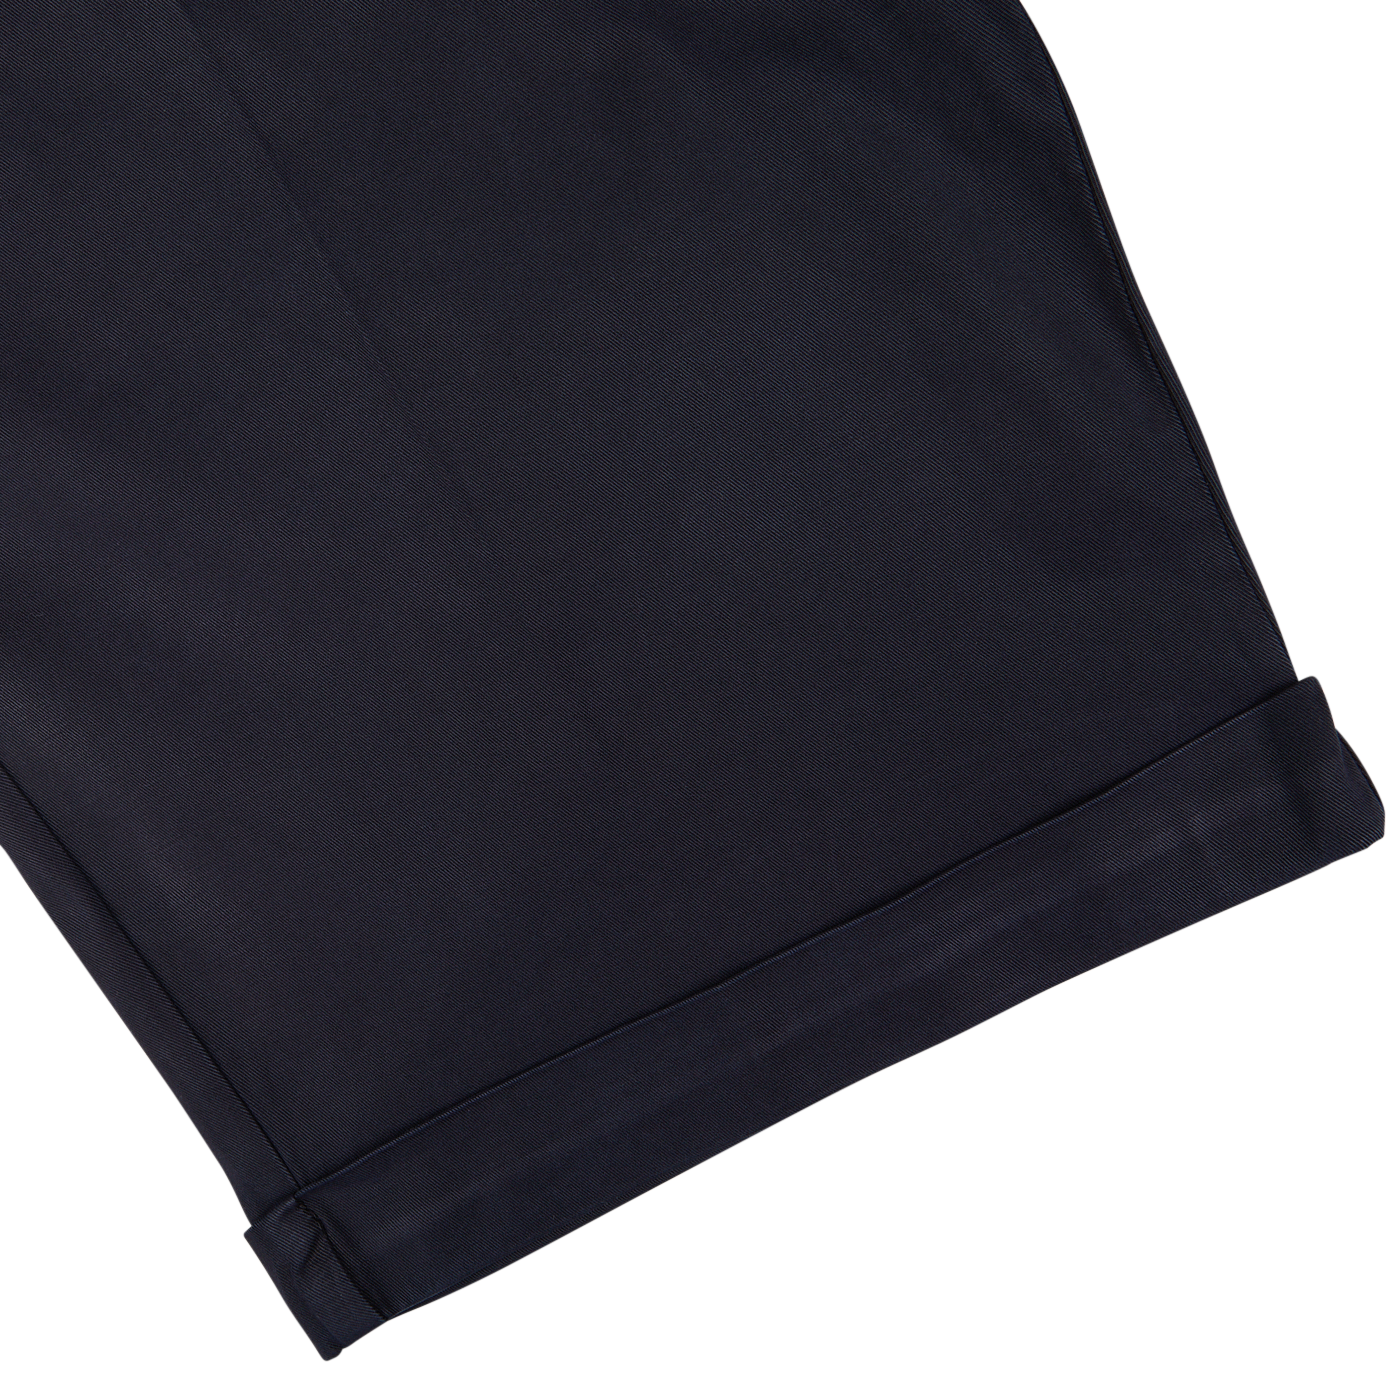 Navy Blue Cotton Blend Pleated Bermuda shorts by Berwich with a visible hem on a white background.